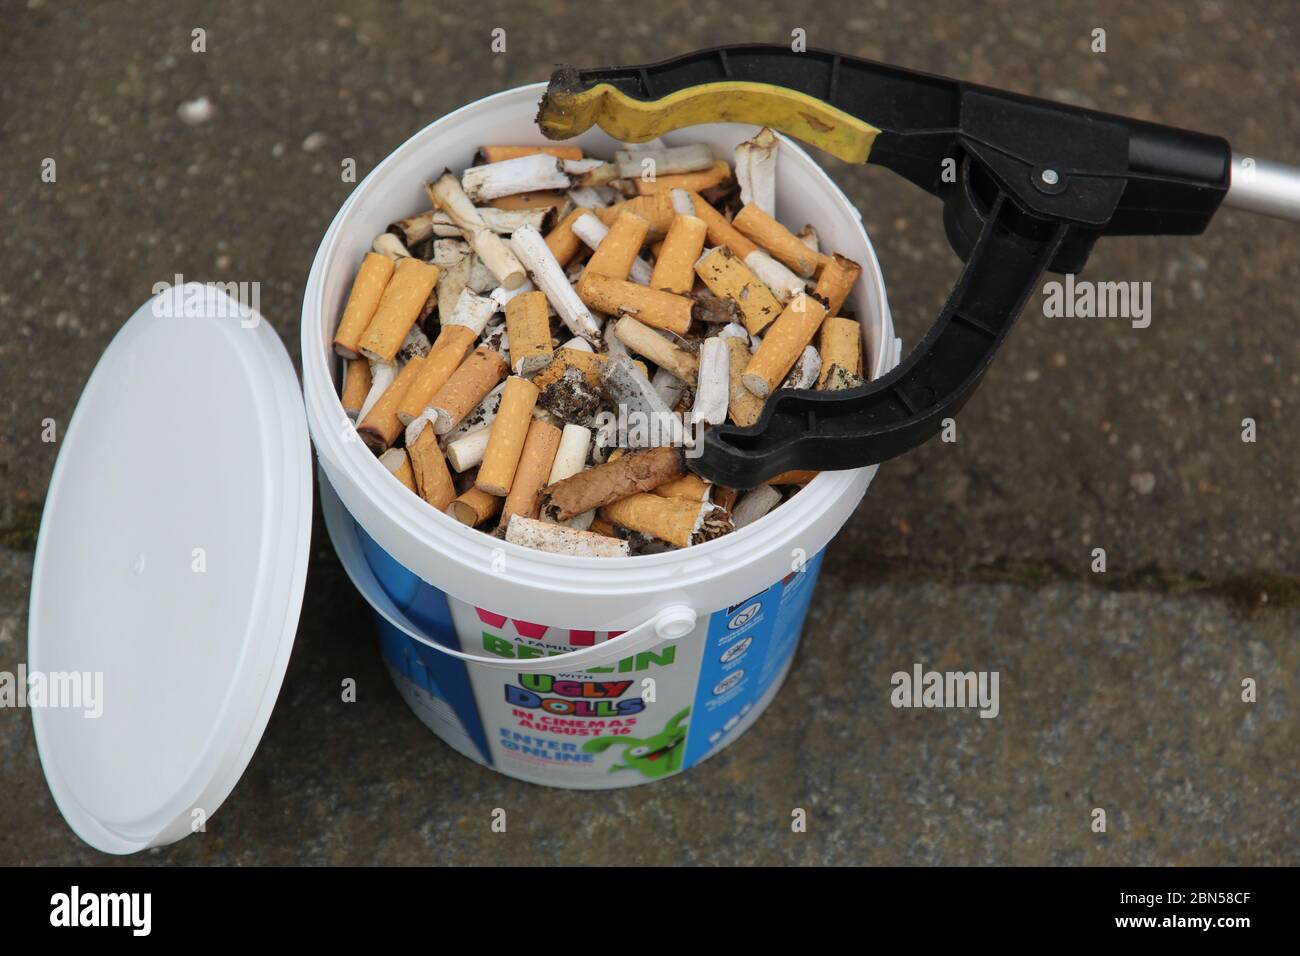 Large Yoghurt Tub Filled with Cigarette Ends and a Litter Picker Stock Photo